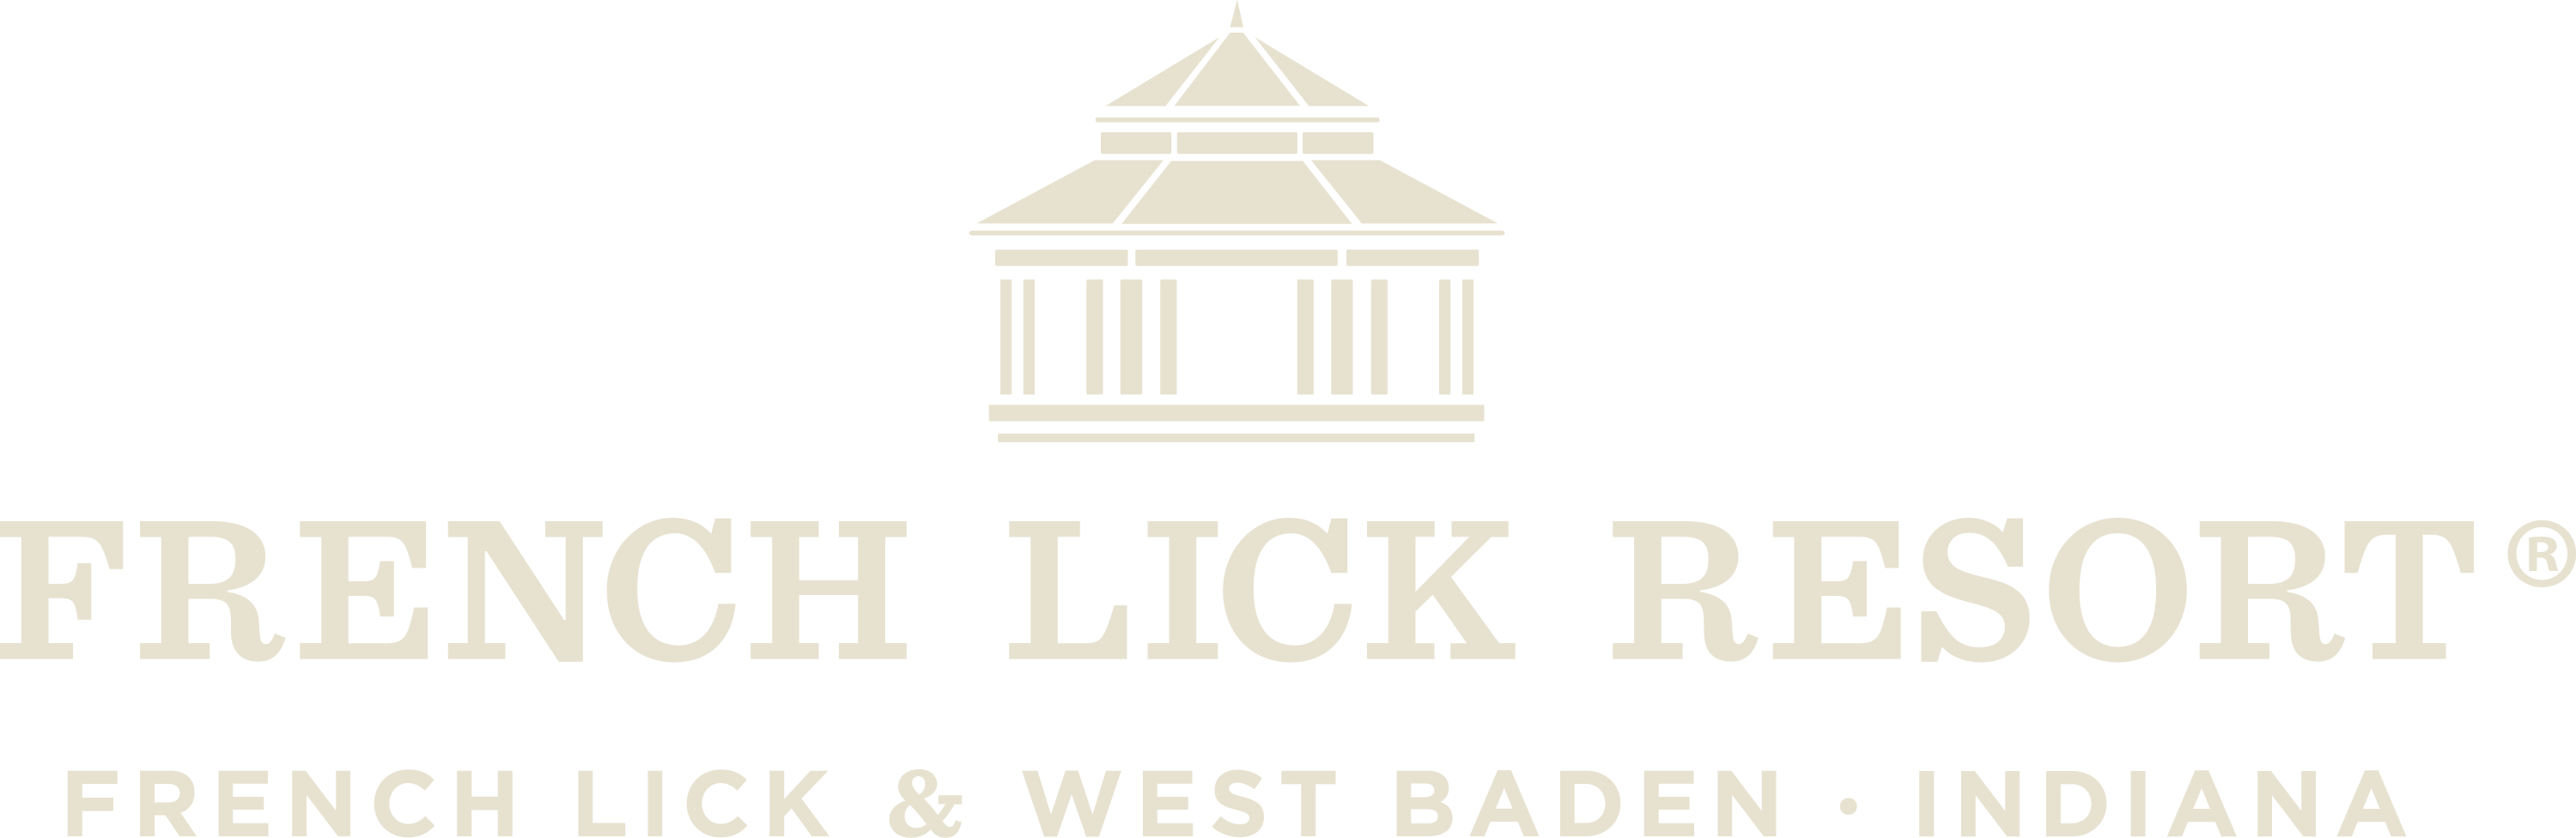 West Indiana Logo - Downloadable Resources | French Lick Resort